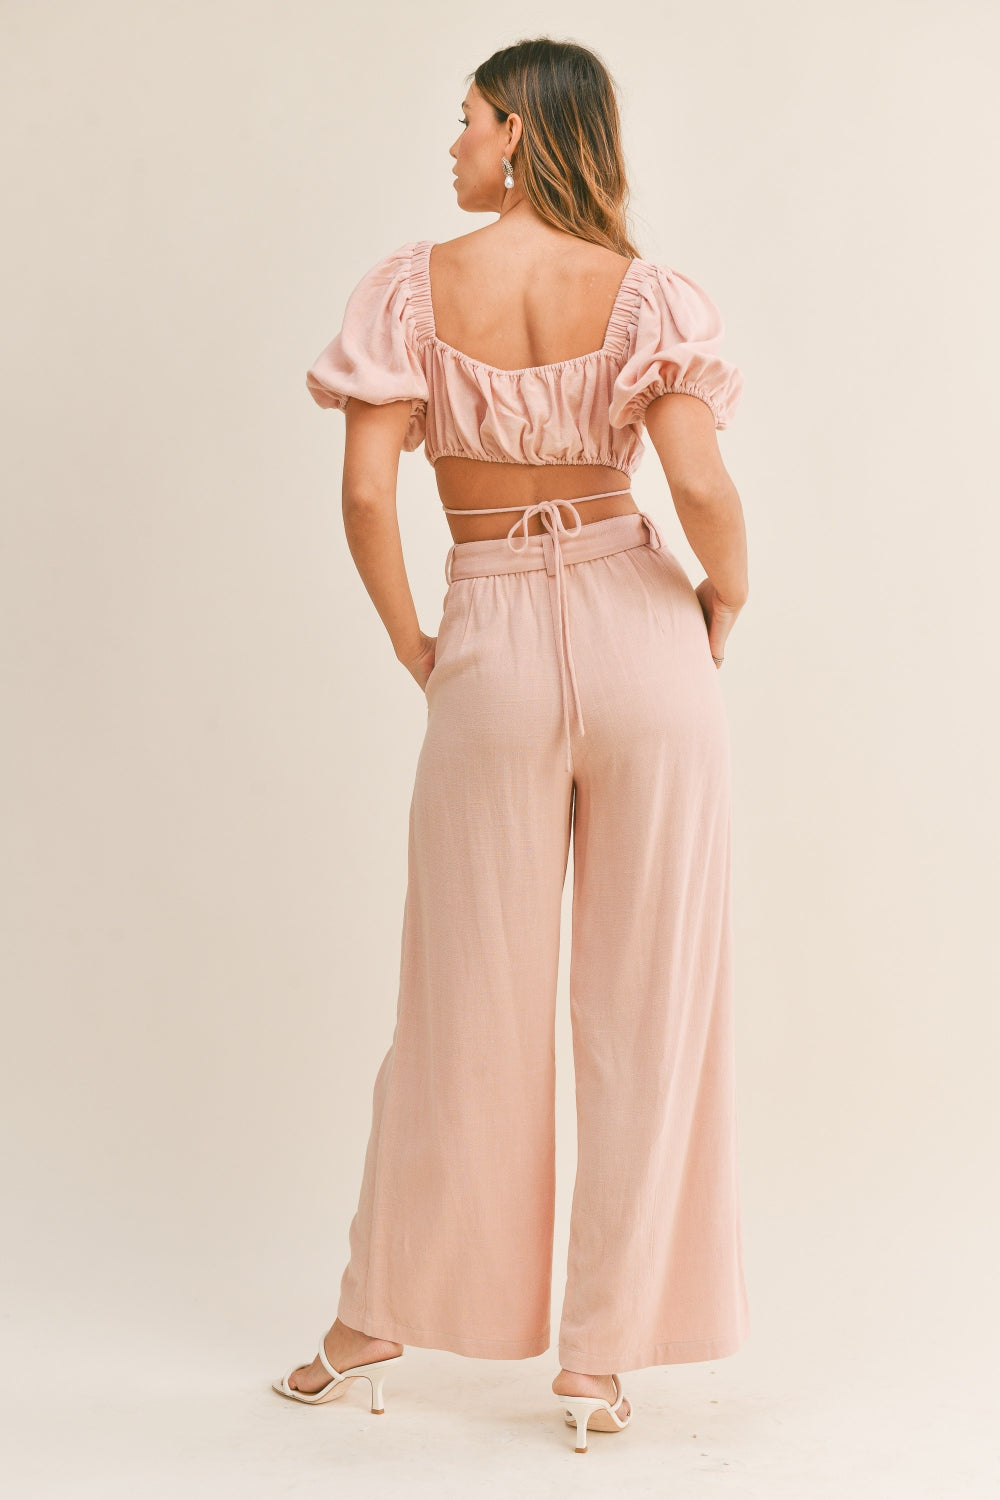 MABLE Cut Out Drawstring Crop Top and Belted Pants Set Trendsi